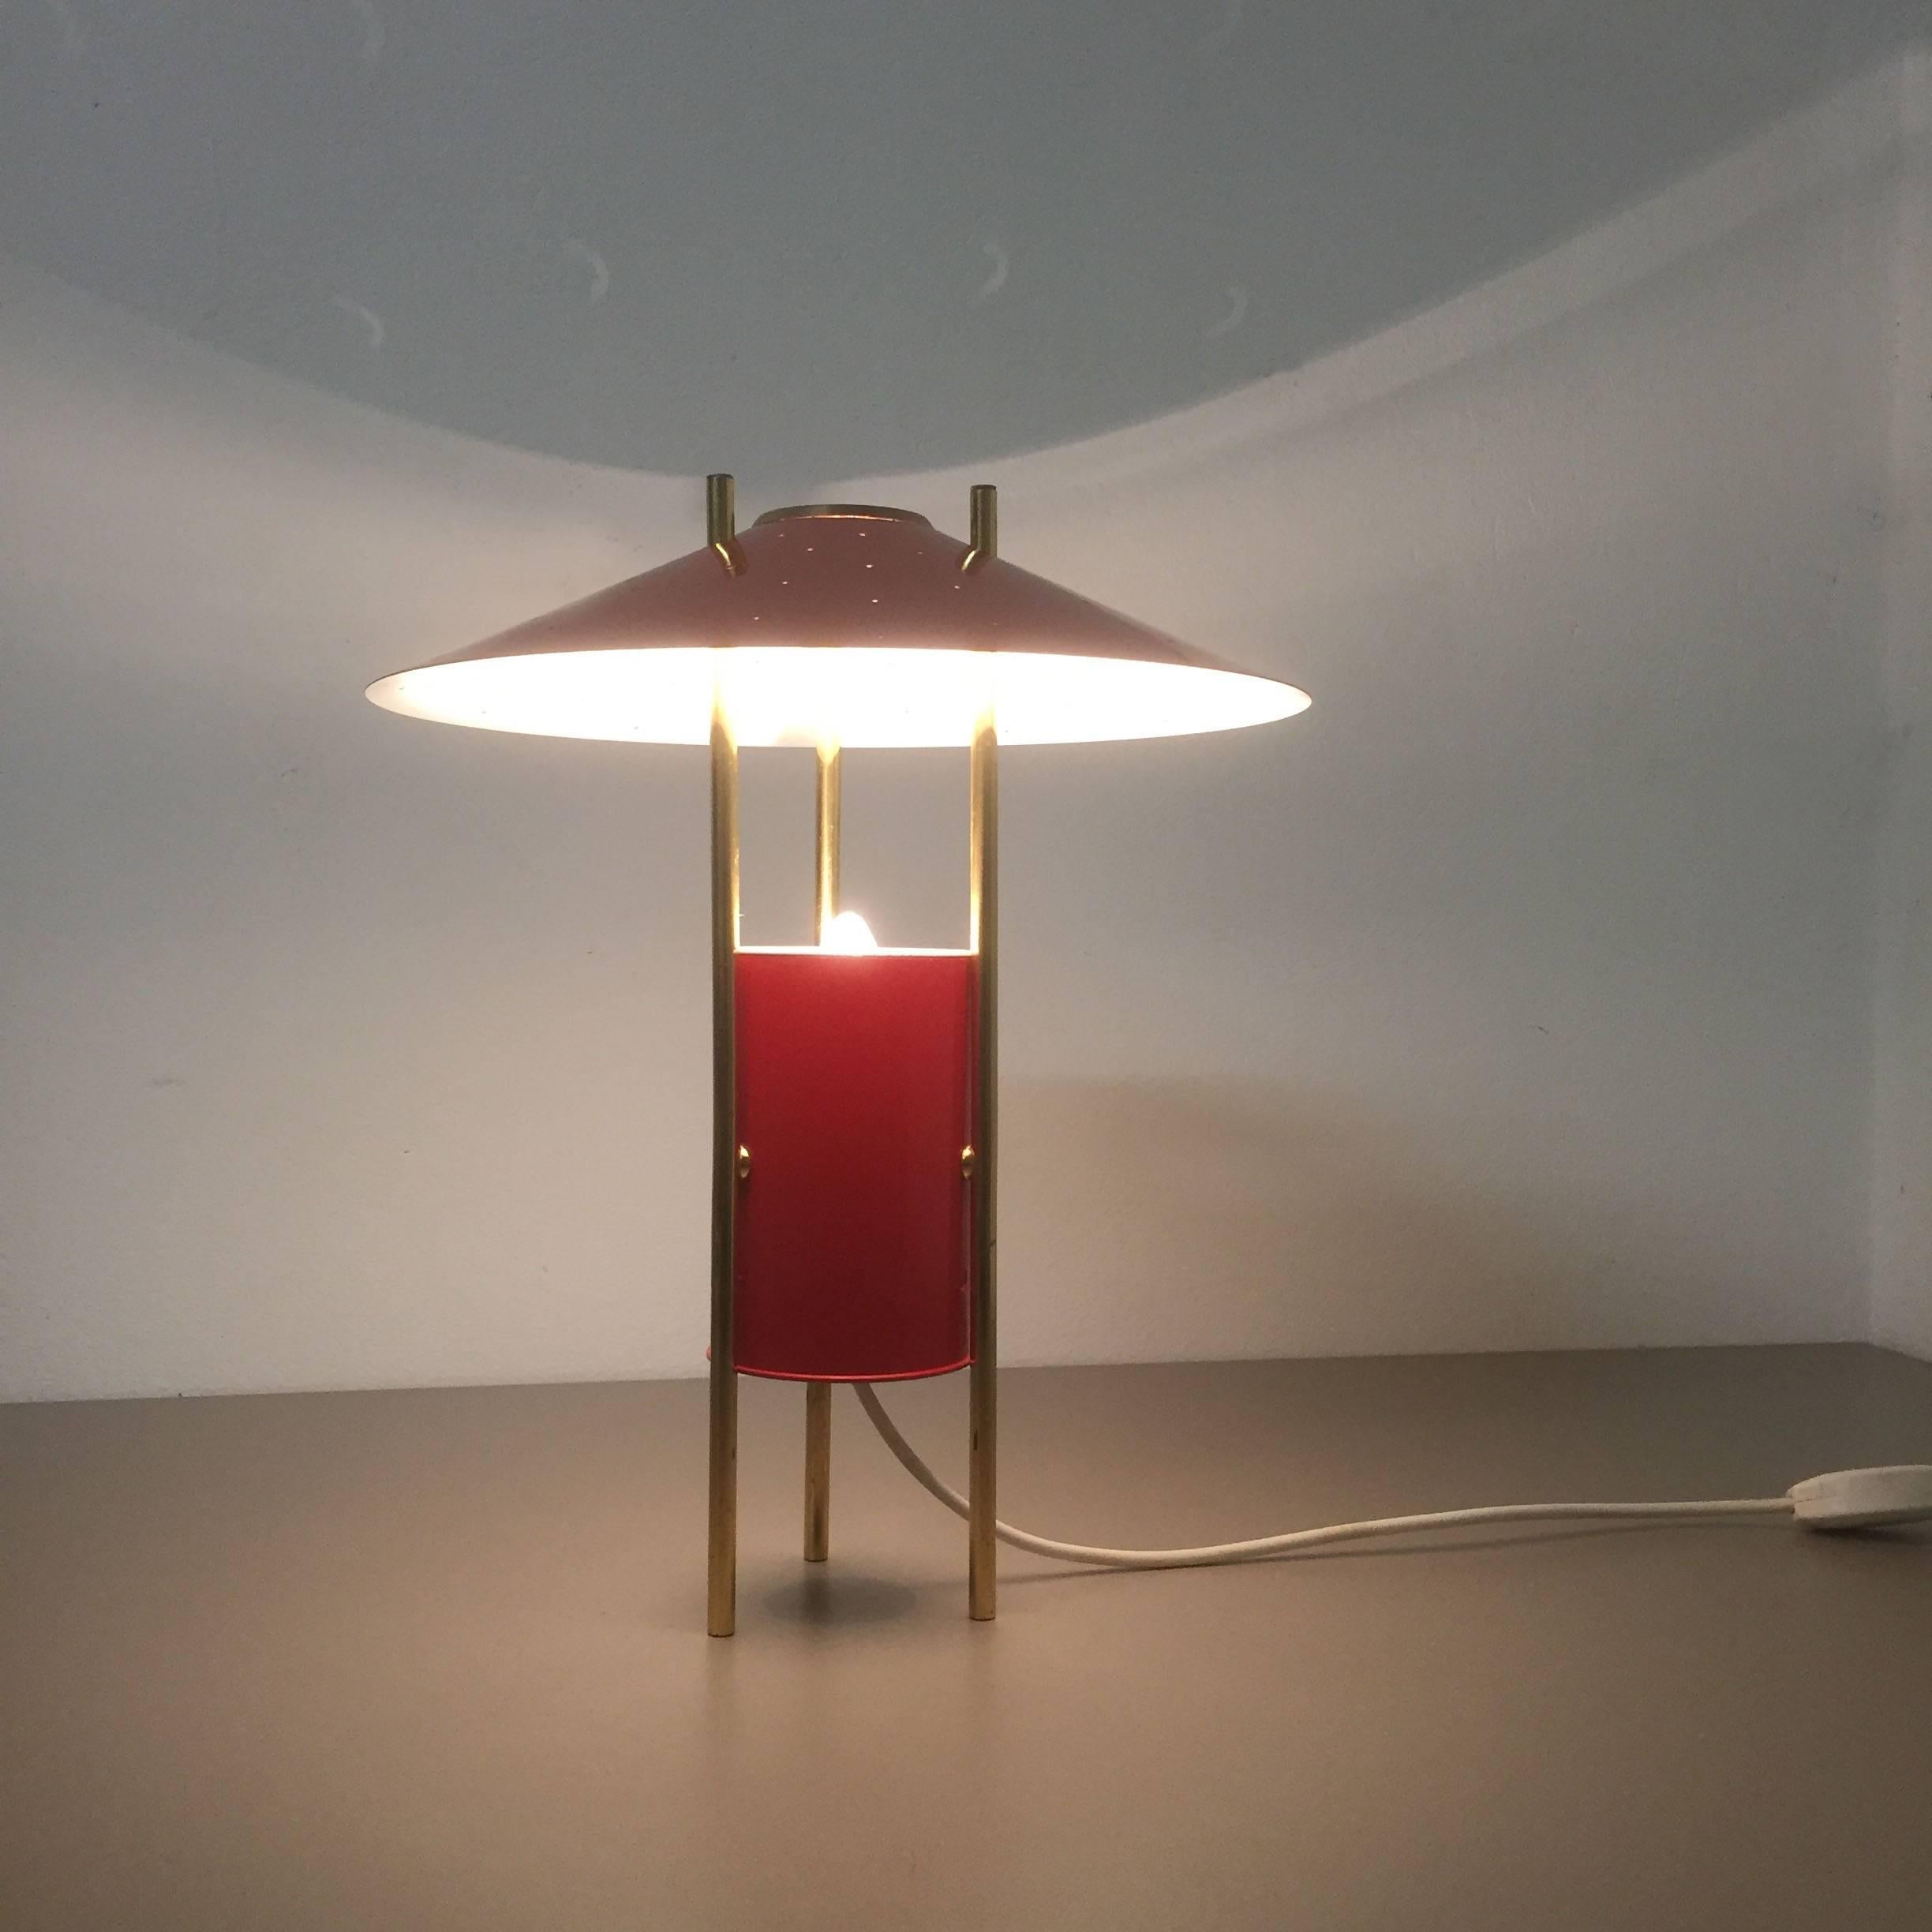 20th Century Vintage 1960s Modernist Midcentury Red Tripod Table Light Made in Italy, 1960s